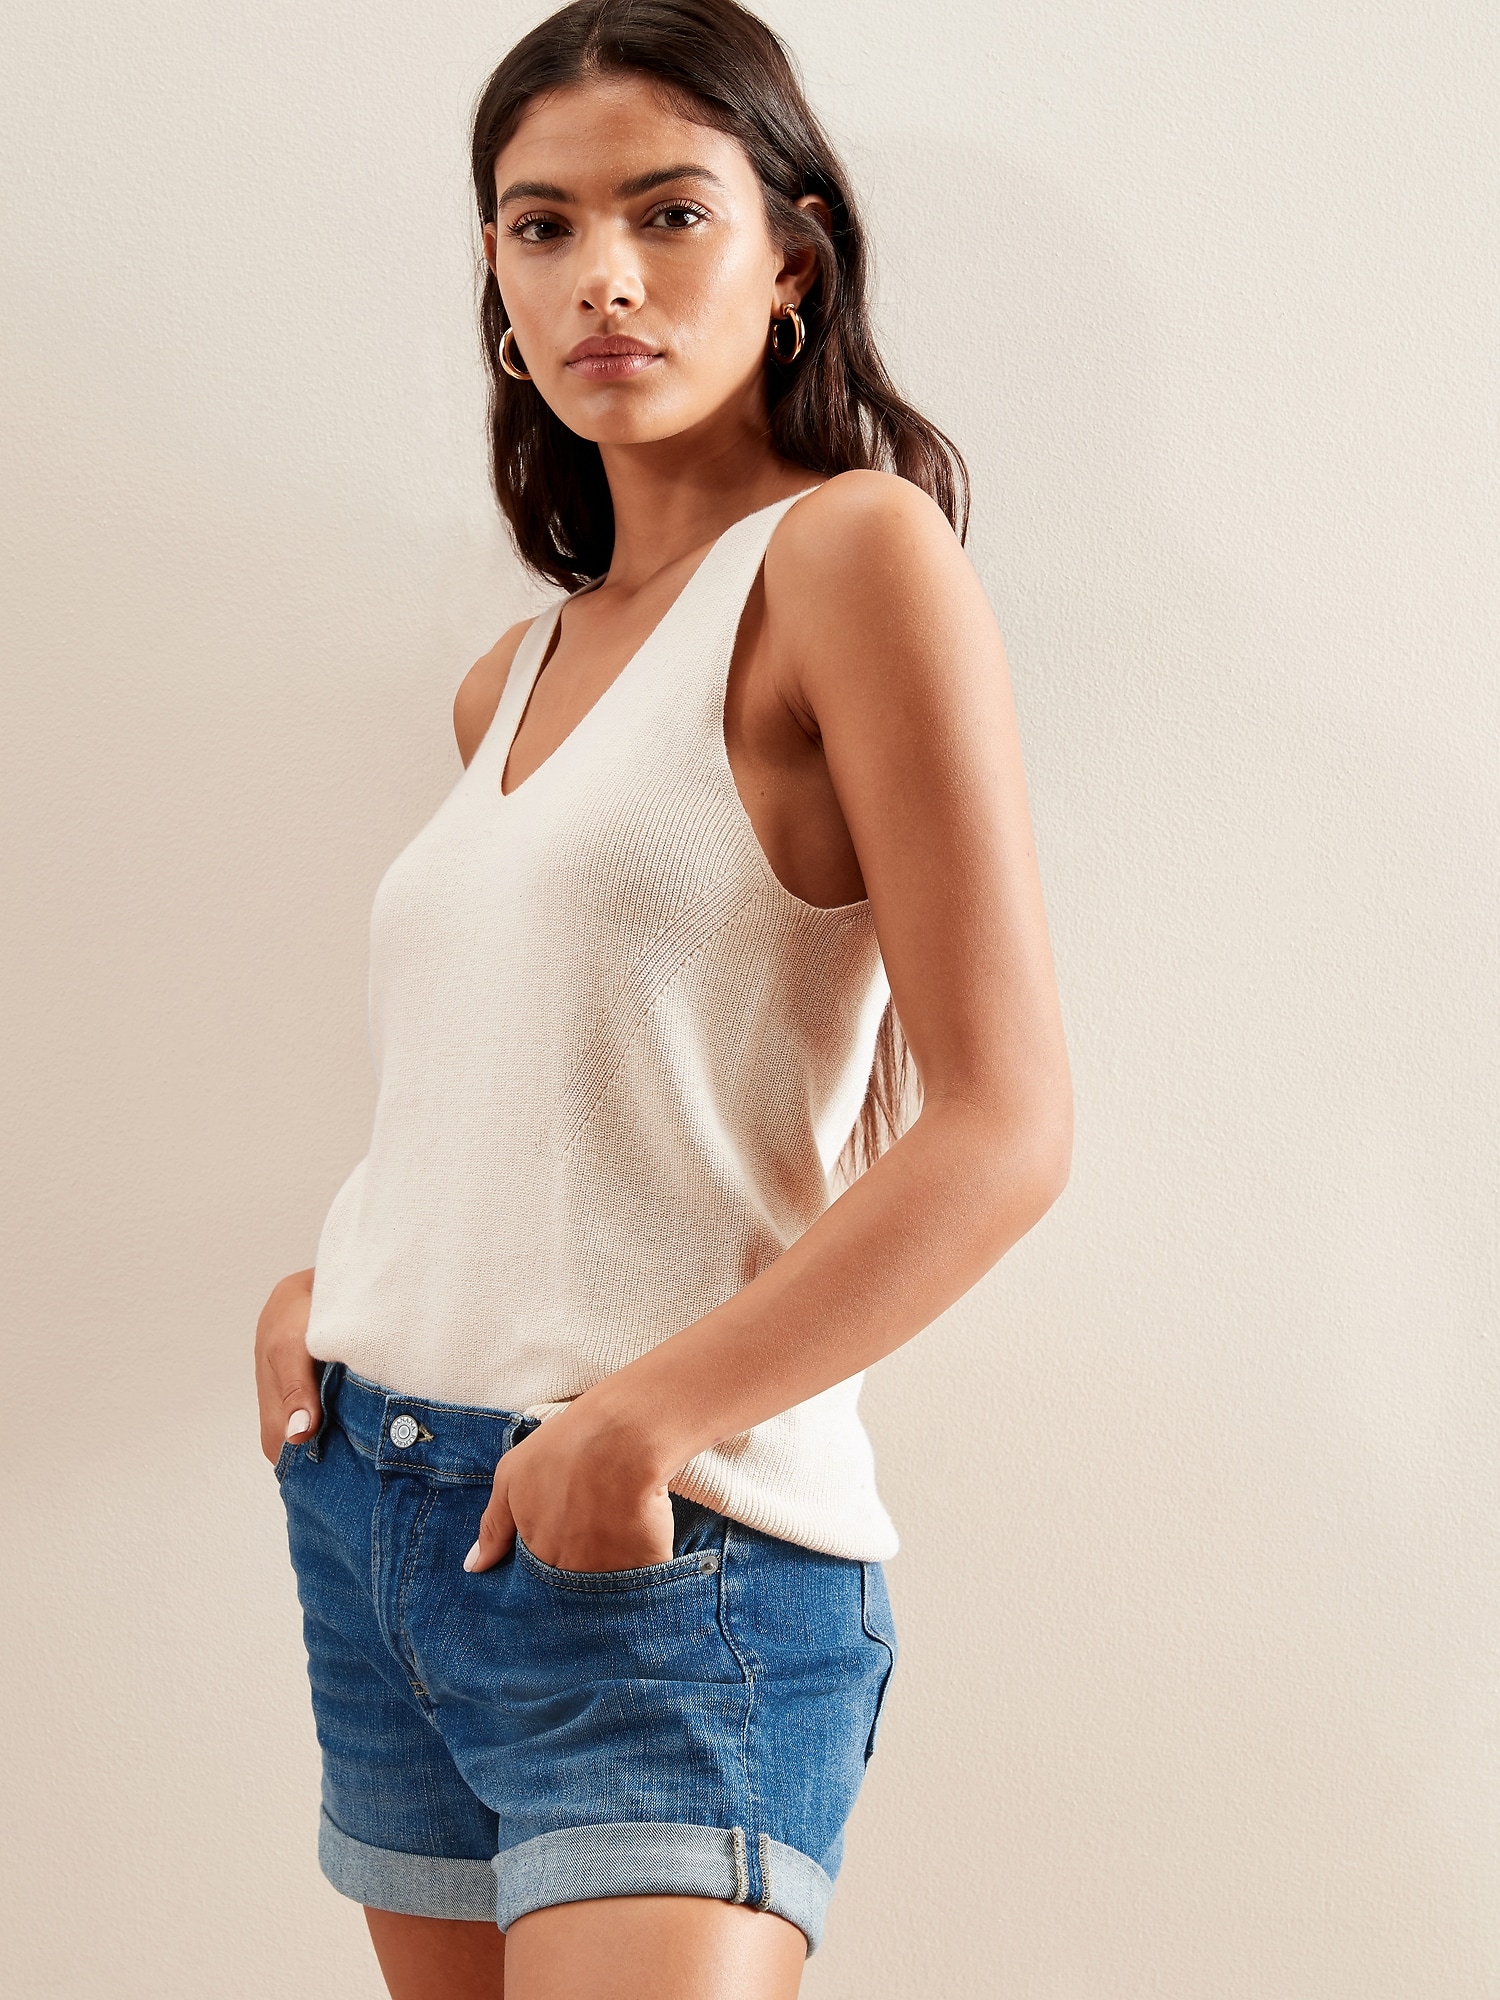 Made with Organically Grown Cotton Sweater Tank